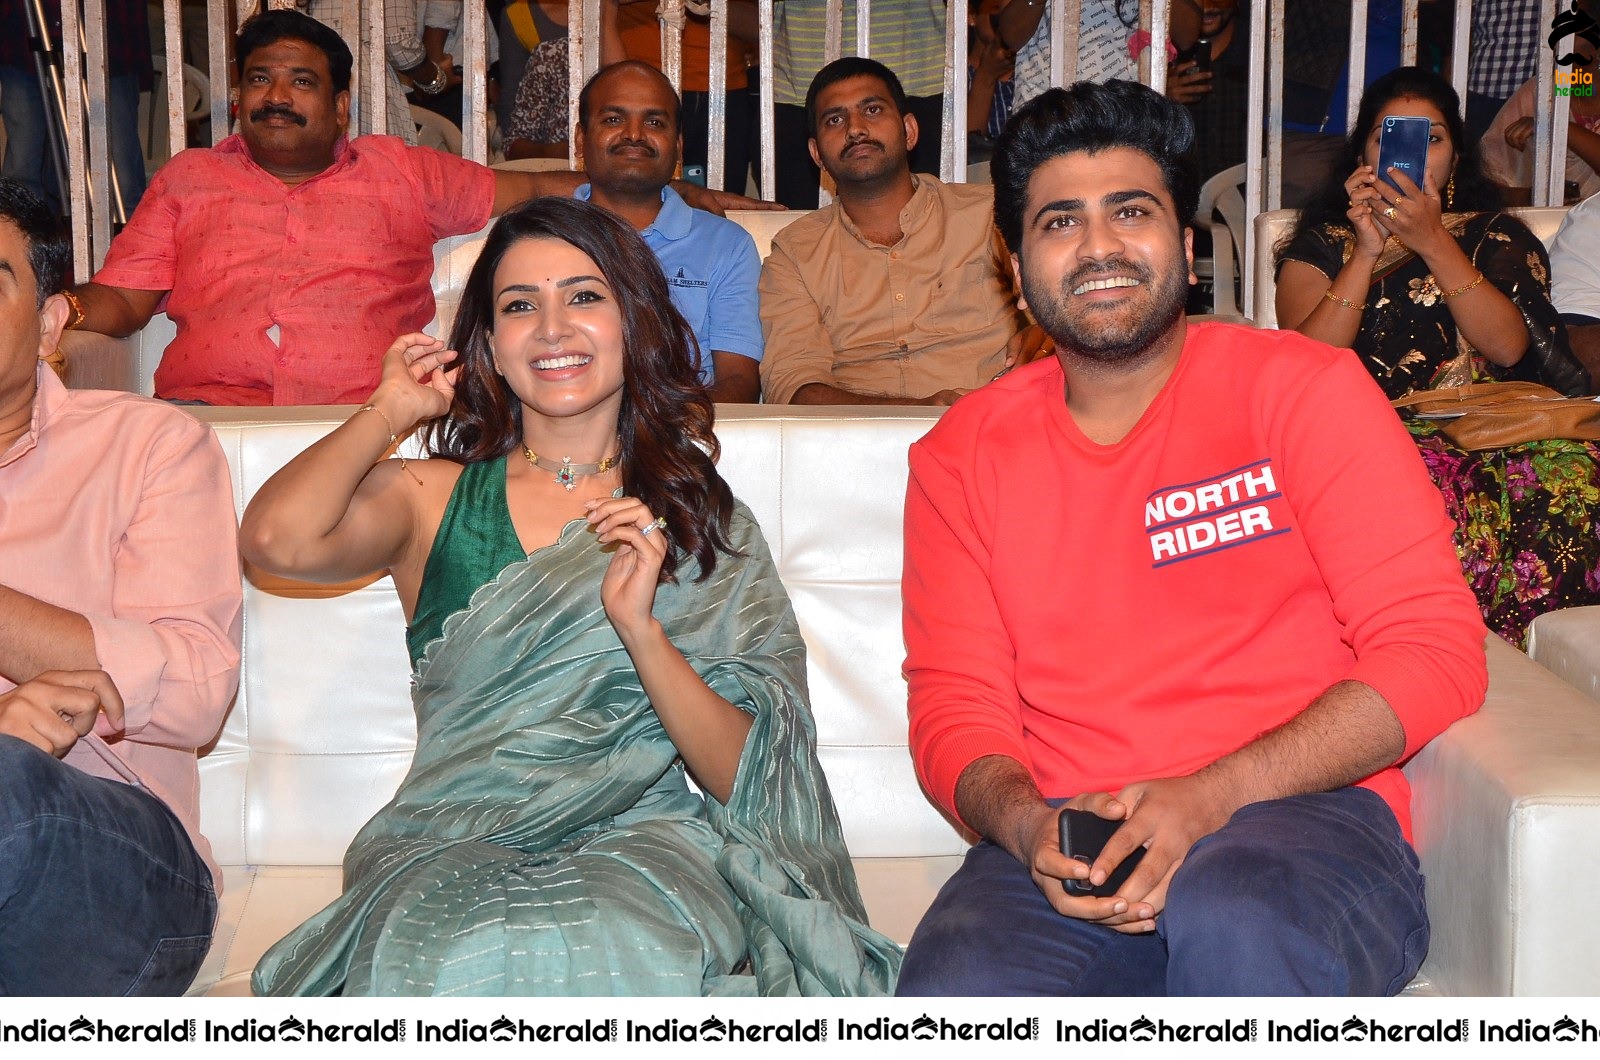 Actor Sharwanand share a hearty laughter with Samantha Akkineni